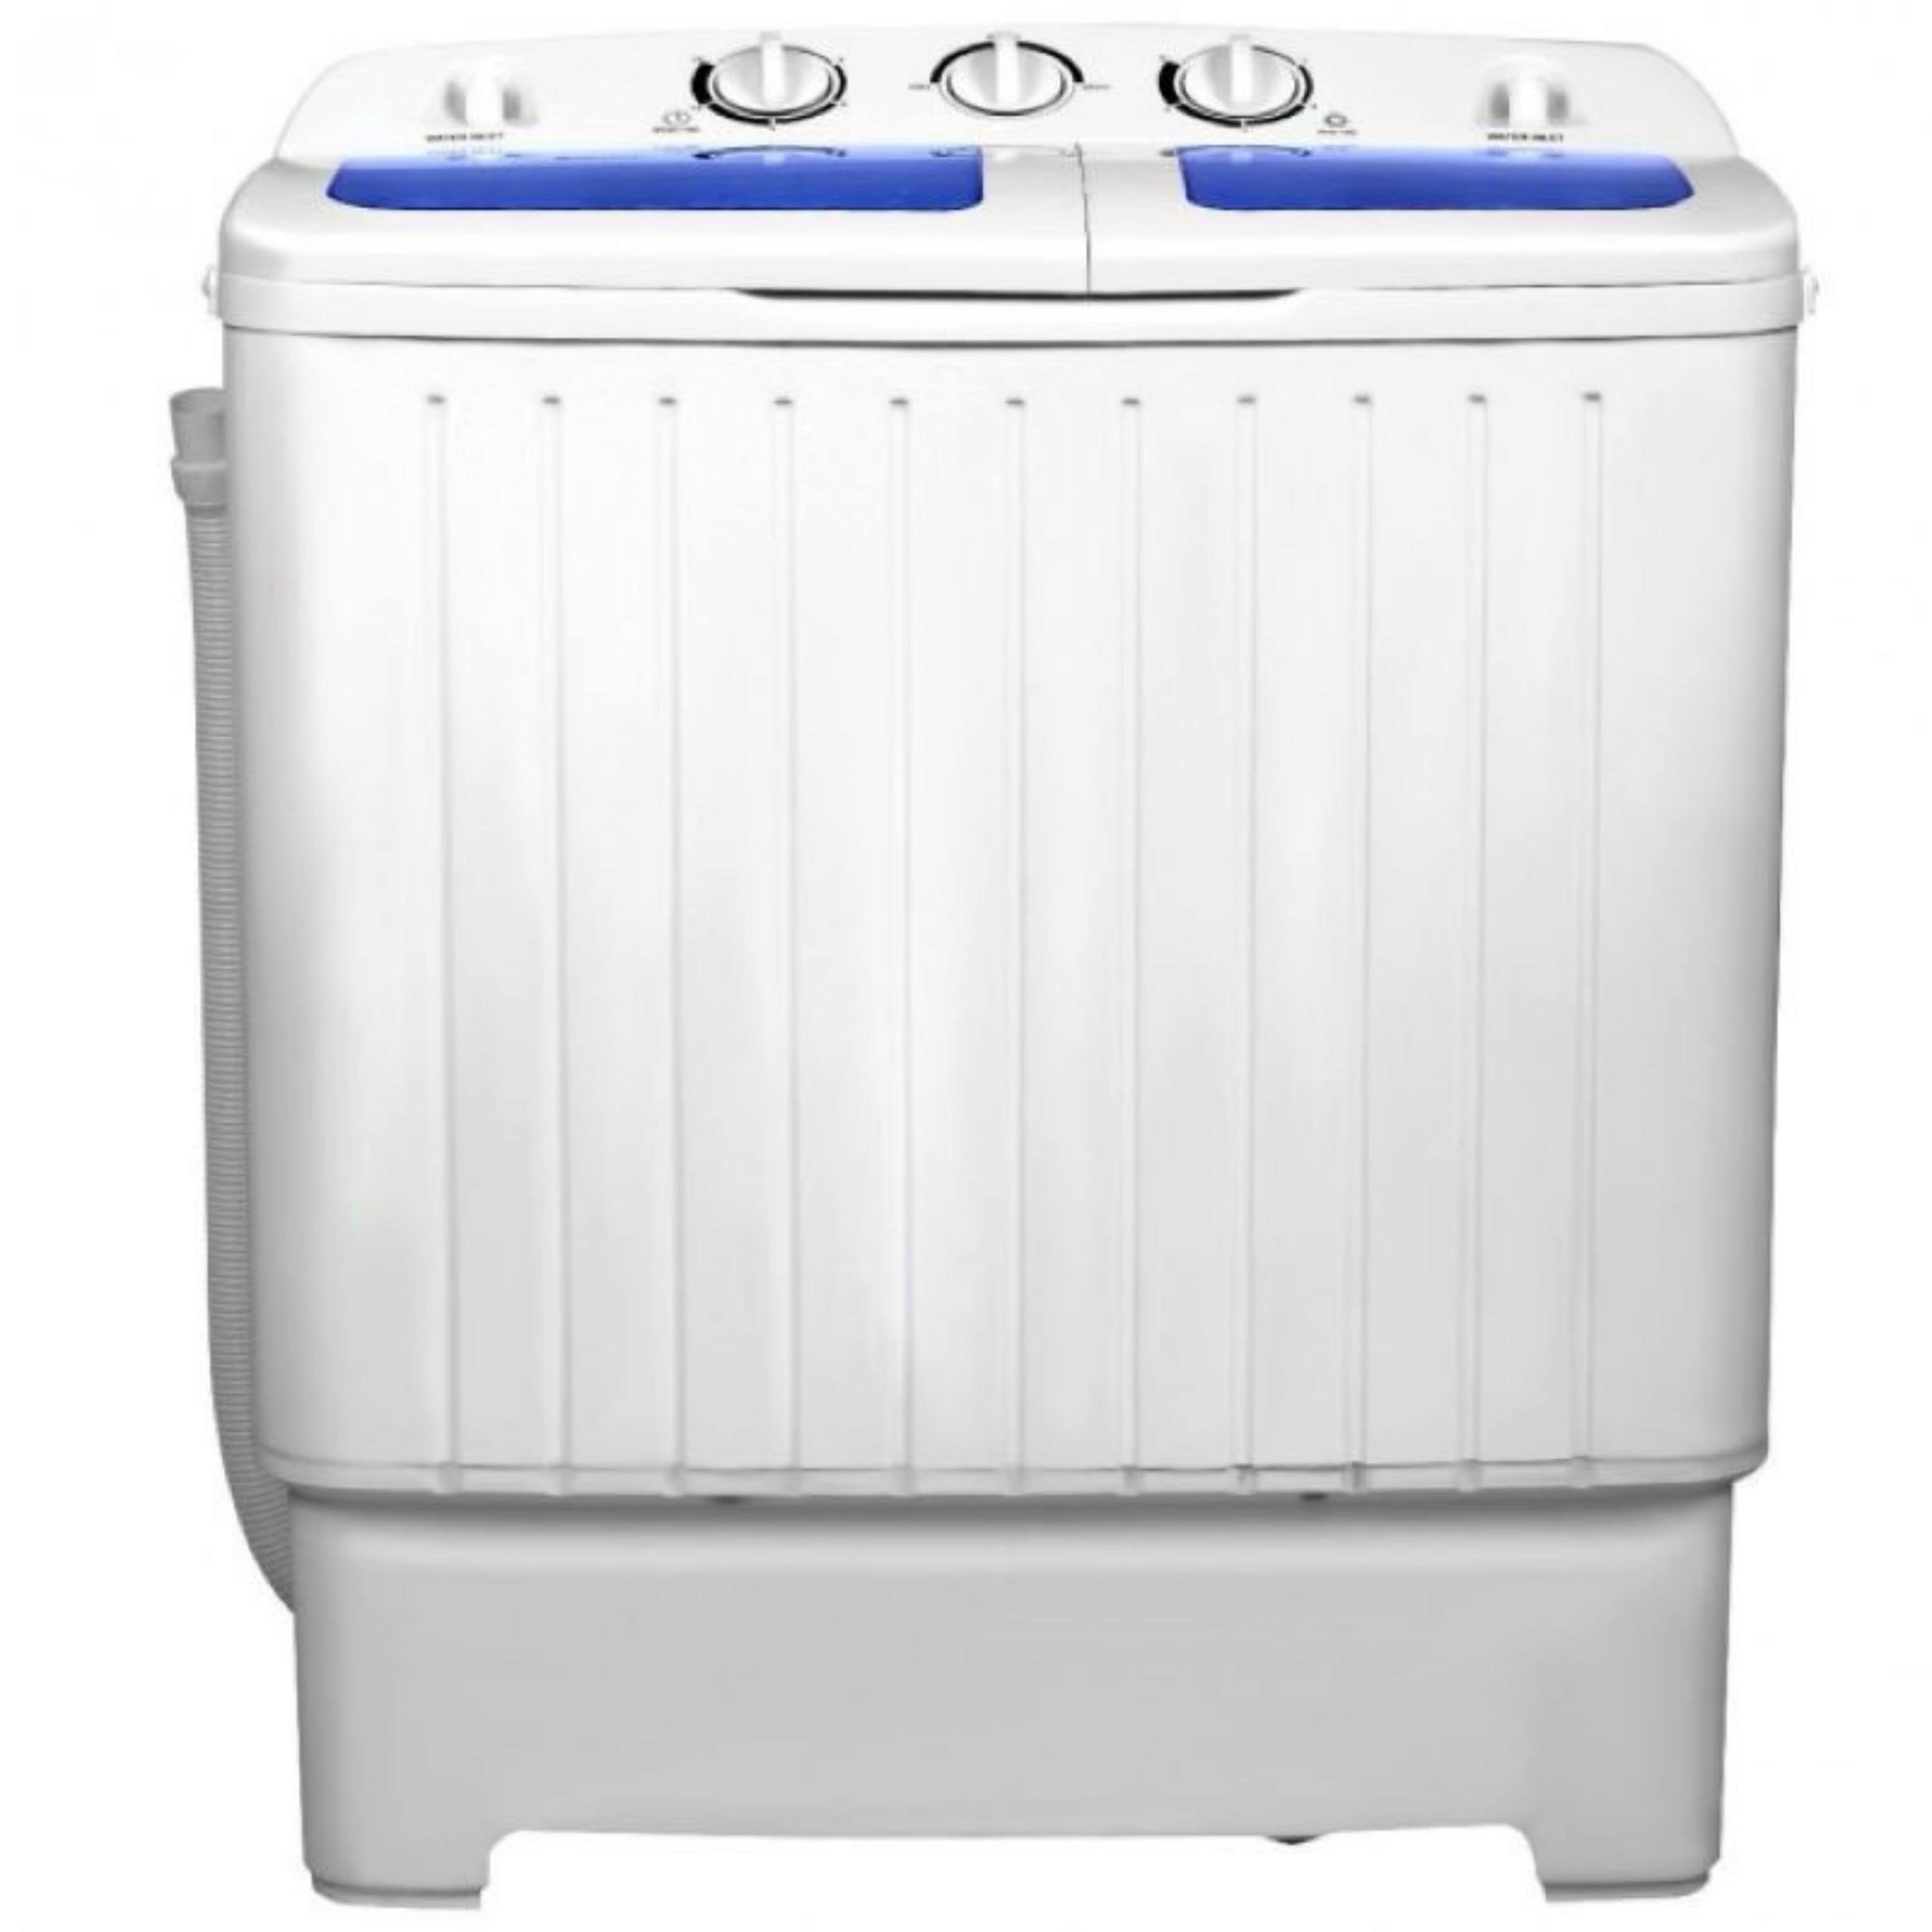 Portable Laundry Washing Machine by BLACK+DECKER, Compact Pulsator Washer  for Clothes, 9 Cubic ft. Tub, White, BPWM09W & BLACK+DECKER BCED26 Portable  Dryer, Small, 4 Modes, White